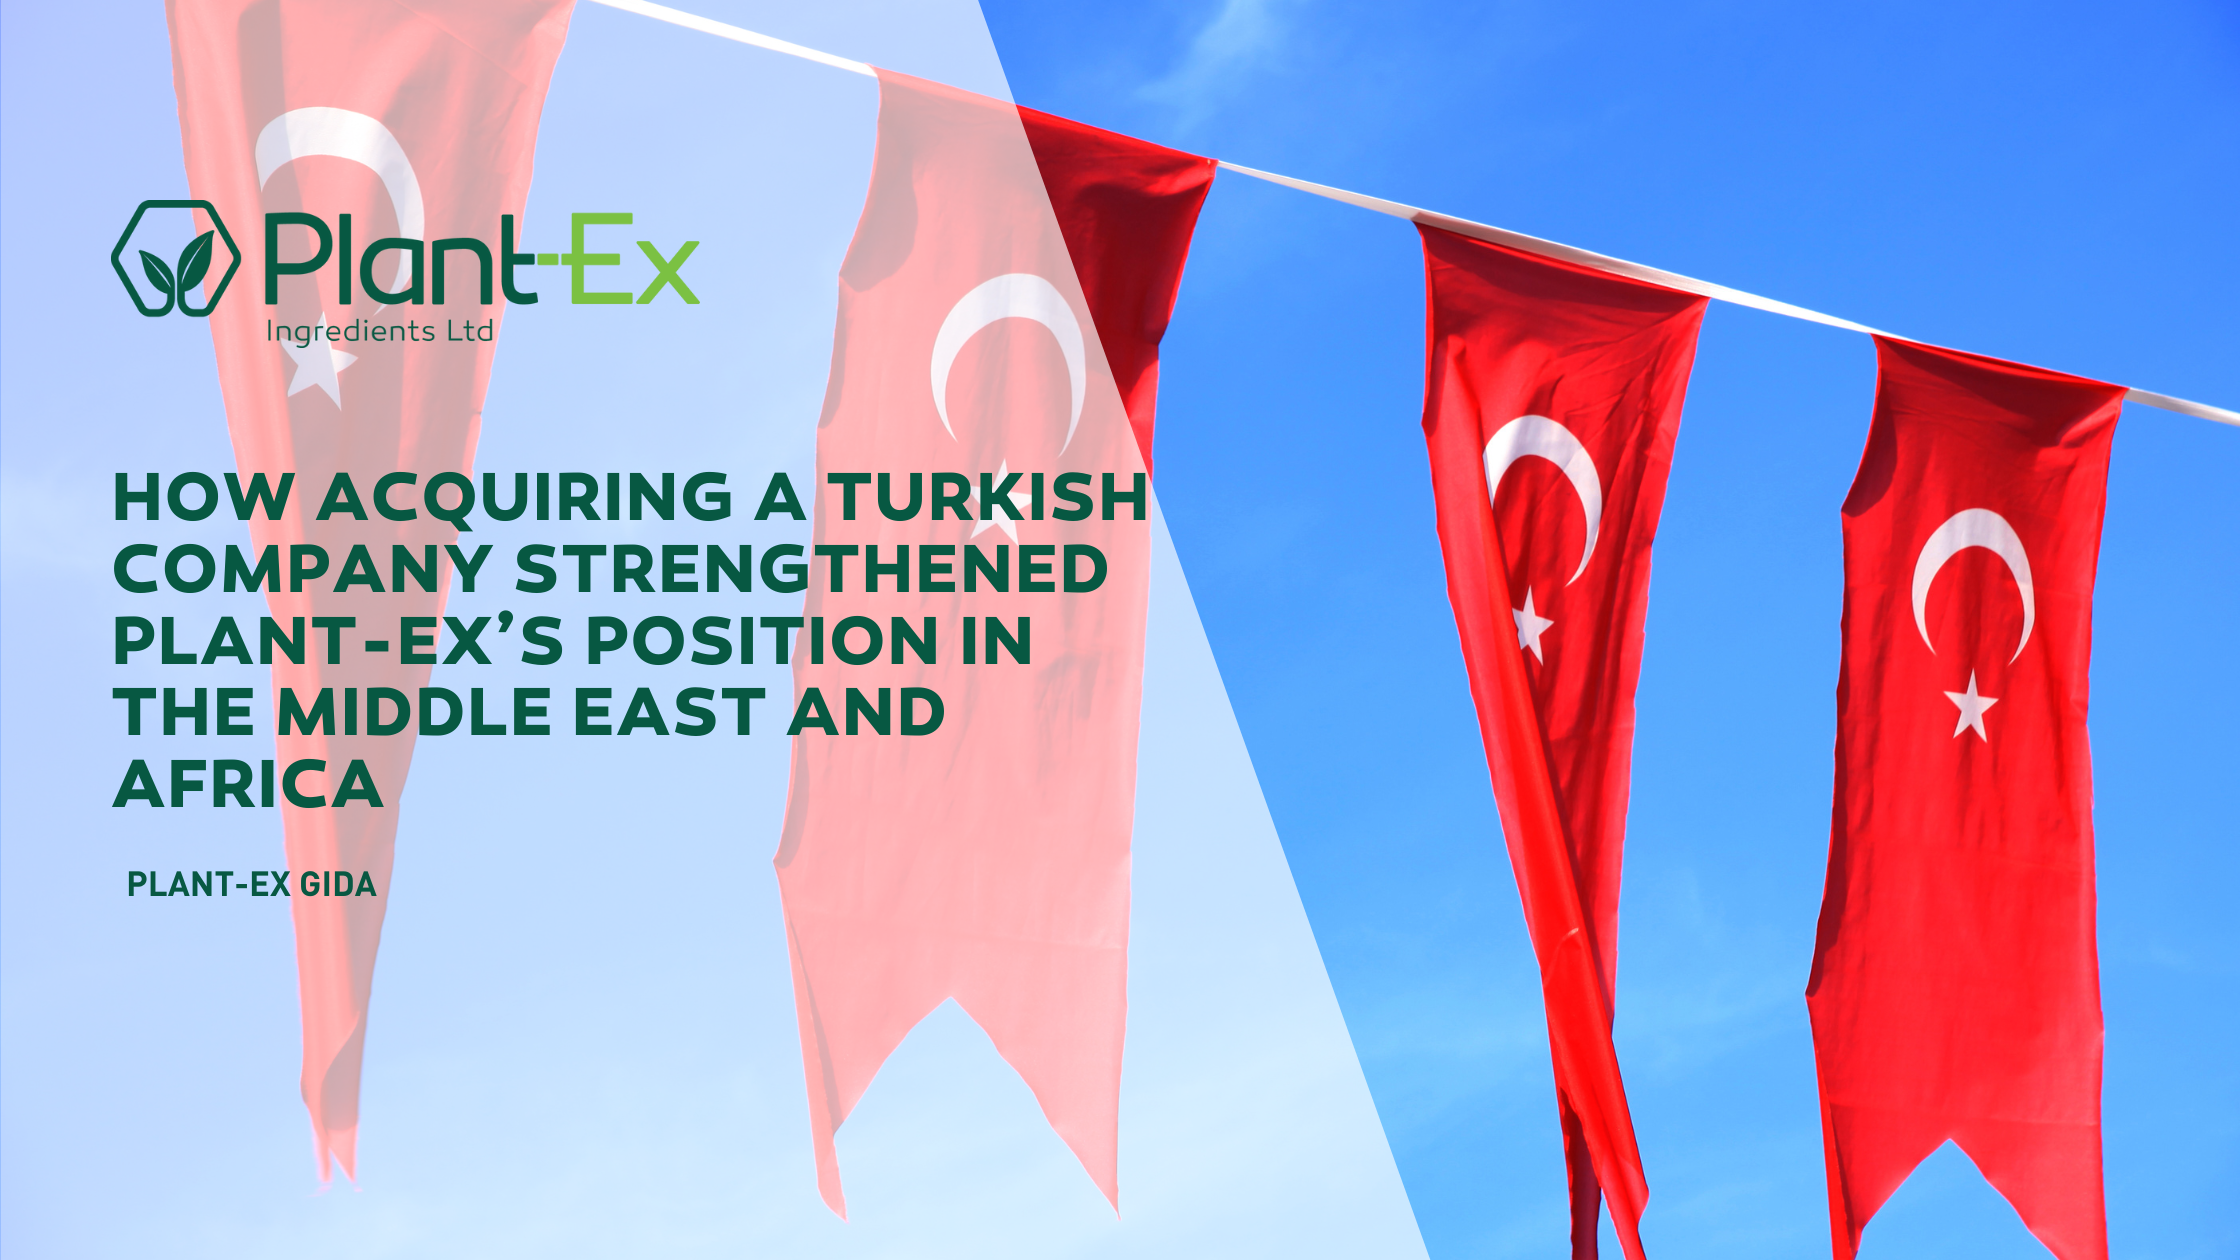 How Acquiring a Turkish Company Strengthened Plant-Ex’s Position in the Middle East and Africa